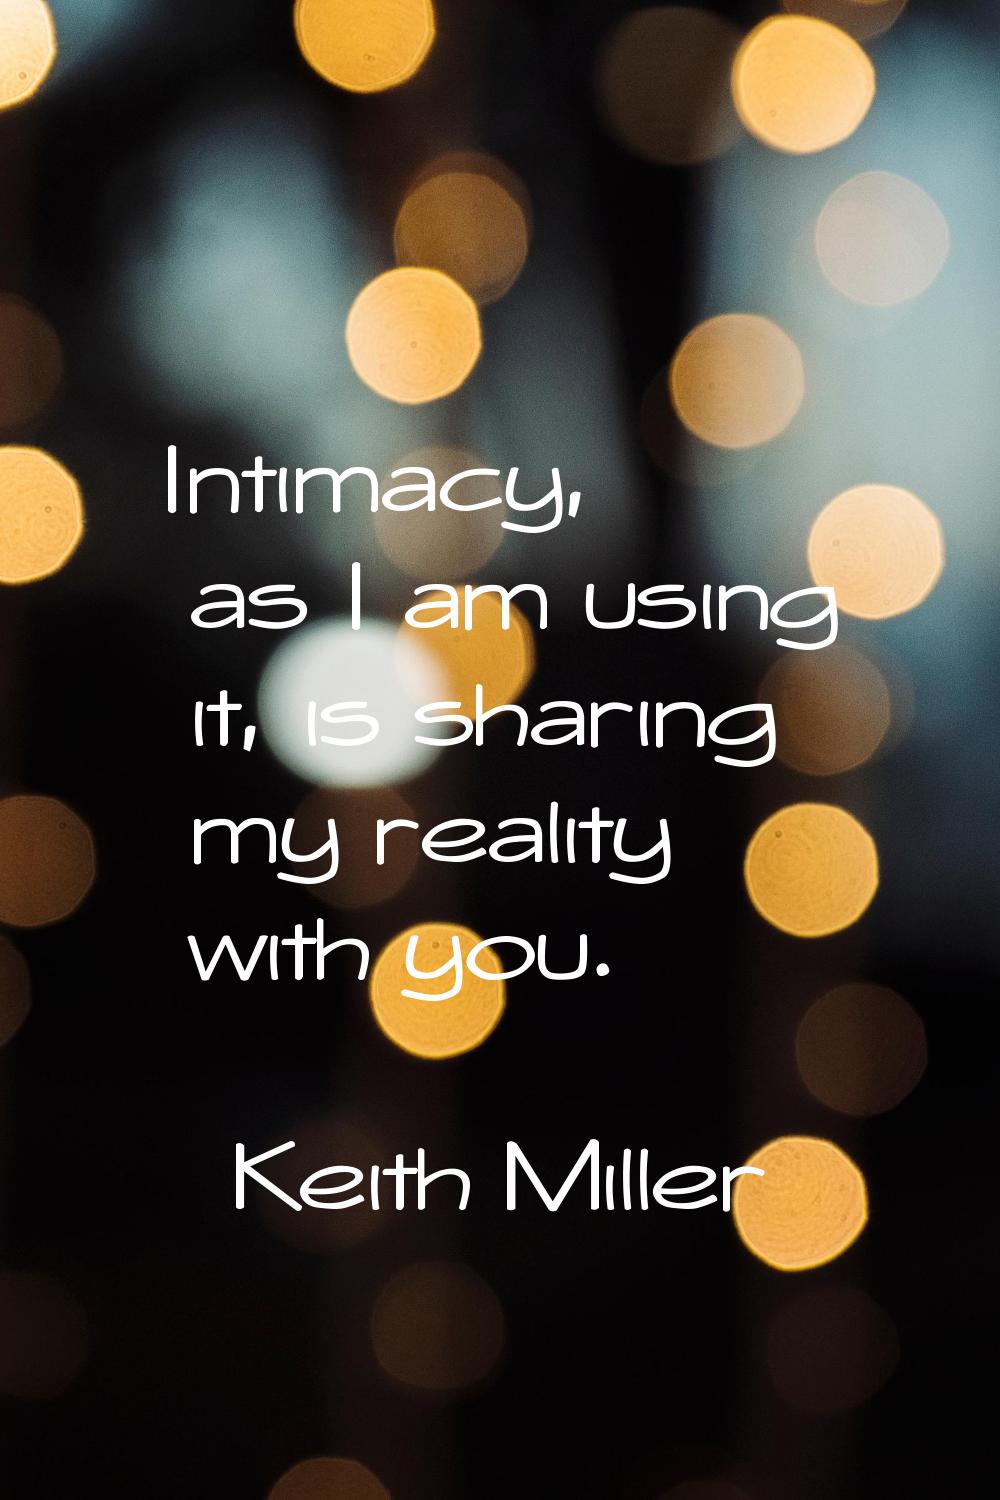 Intimacy, as I am using it, is sharing my reality with you.